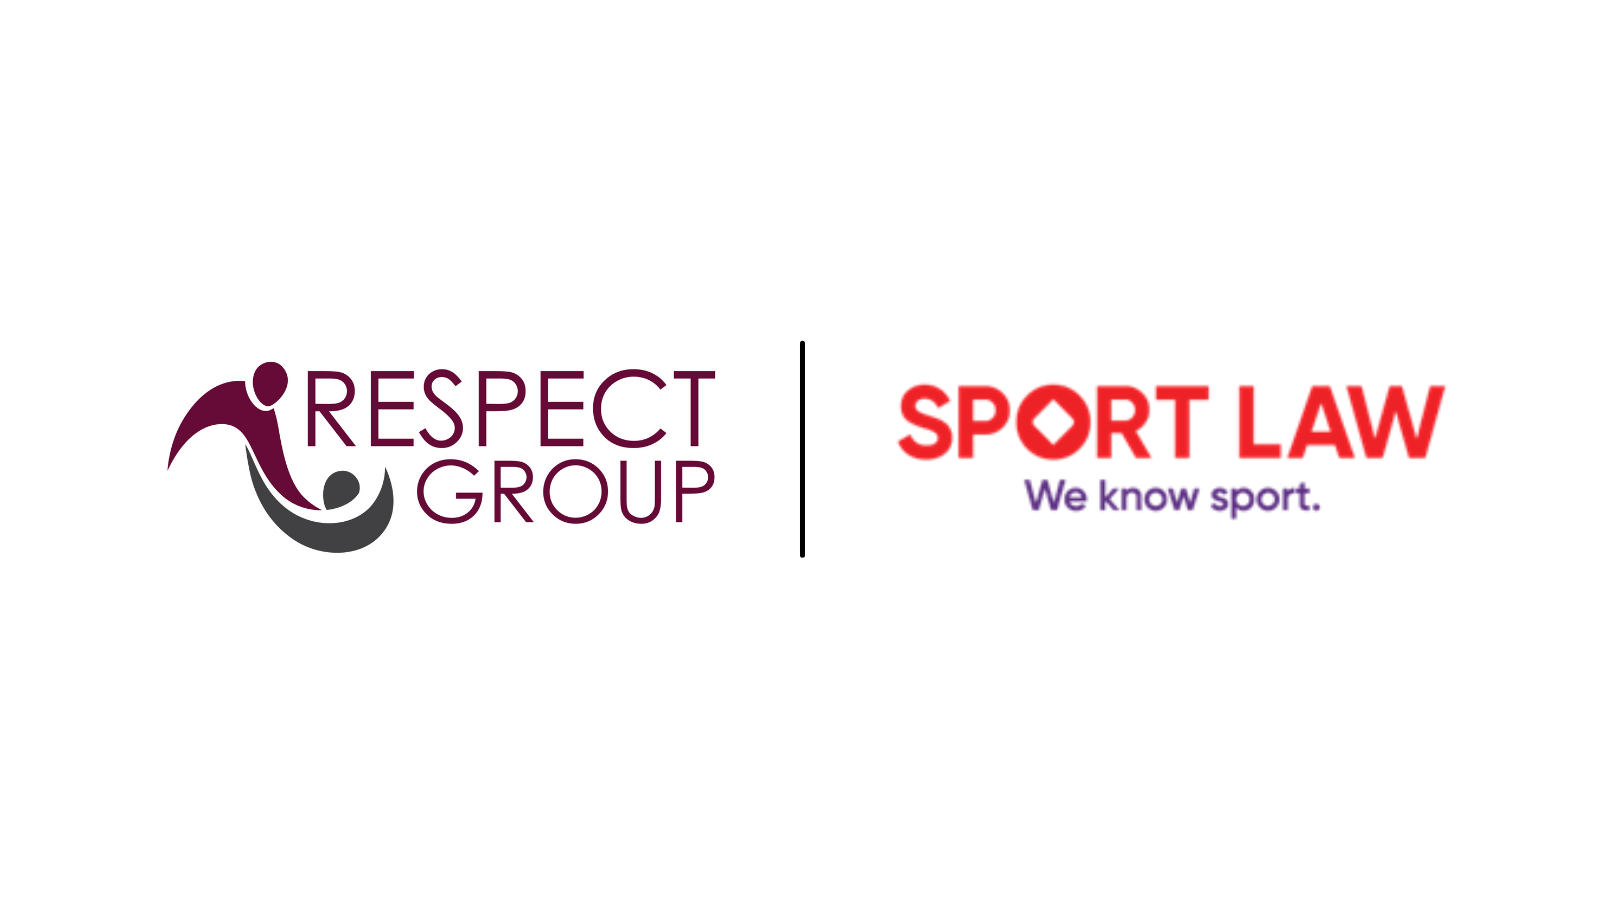 sport law and respect group partnership